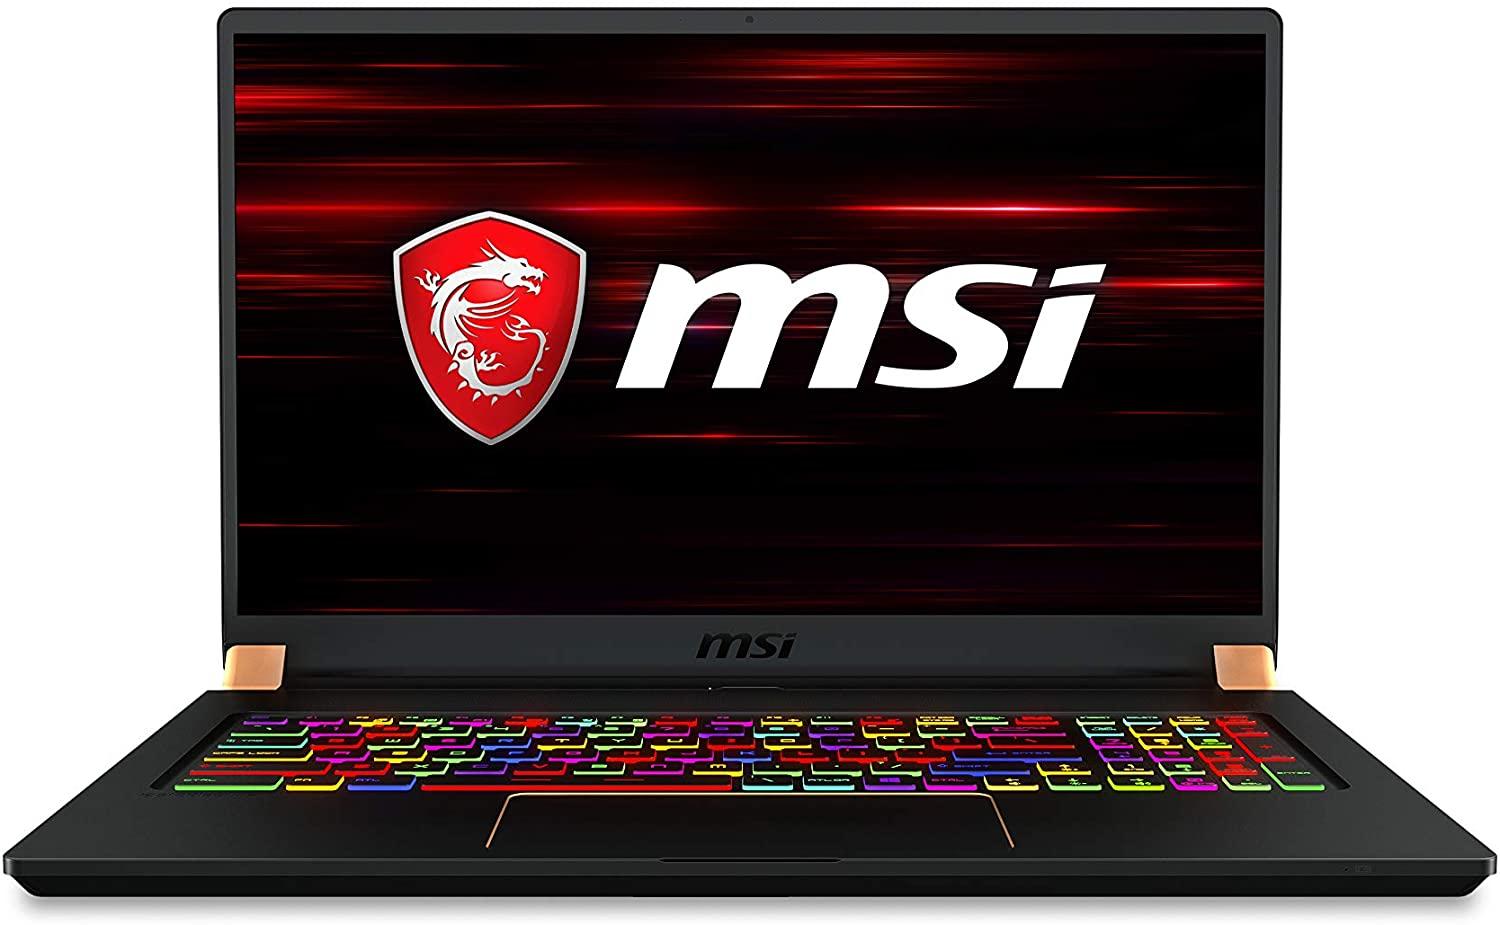 MSI GS75 17.3in i7 16GB 512GB RTX2060 Notebook Laptop for $1399.99 Shipped